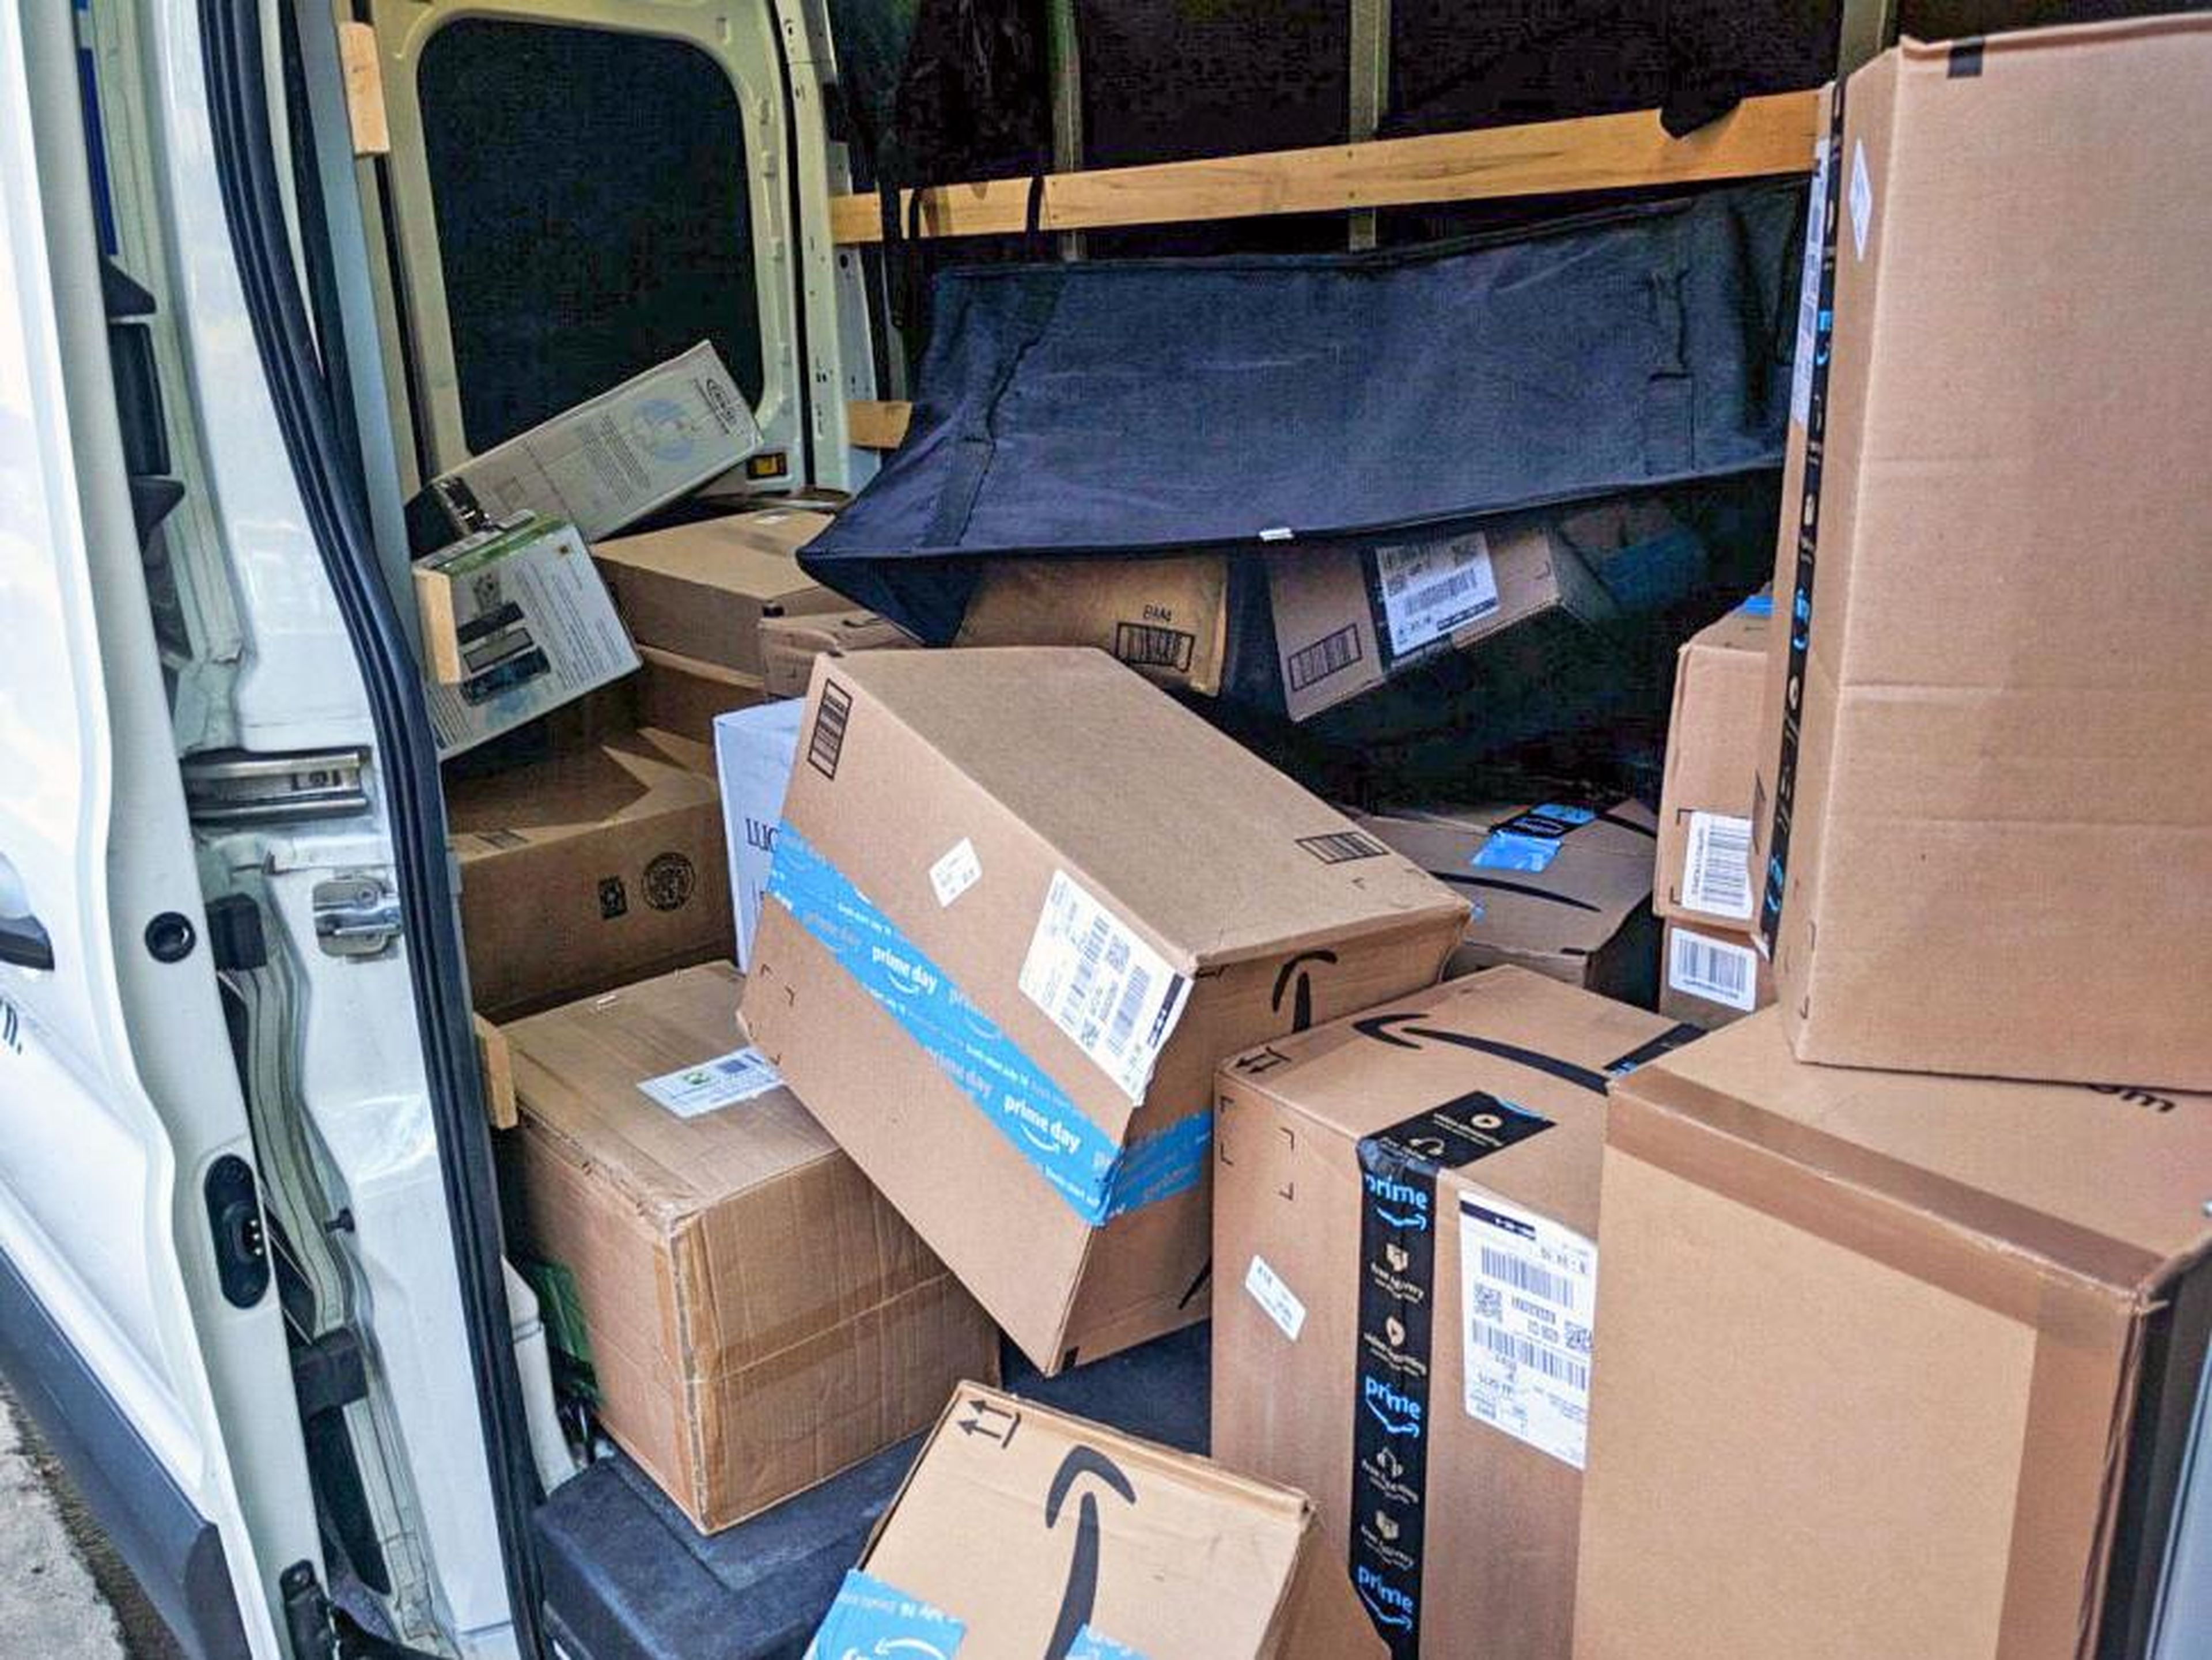 'Someone is going to die in this truck': Amazon drivers and managers describe harrowing deliveries inside trucks with 'bald tires,' broken mirrors, and faulty brakes